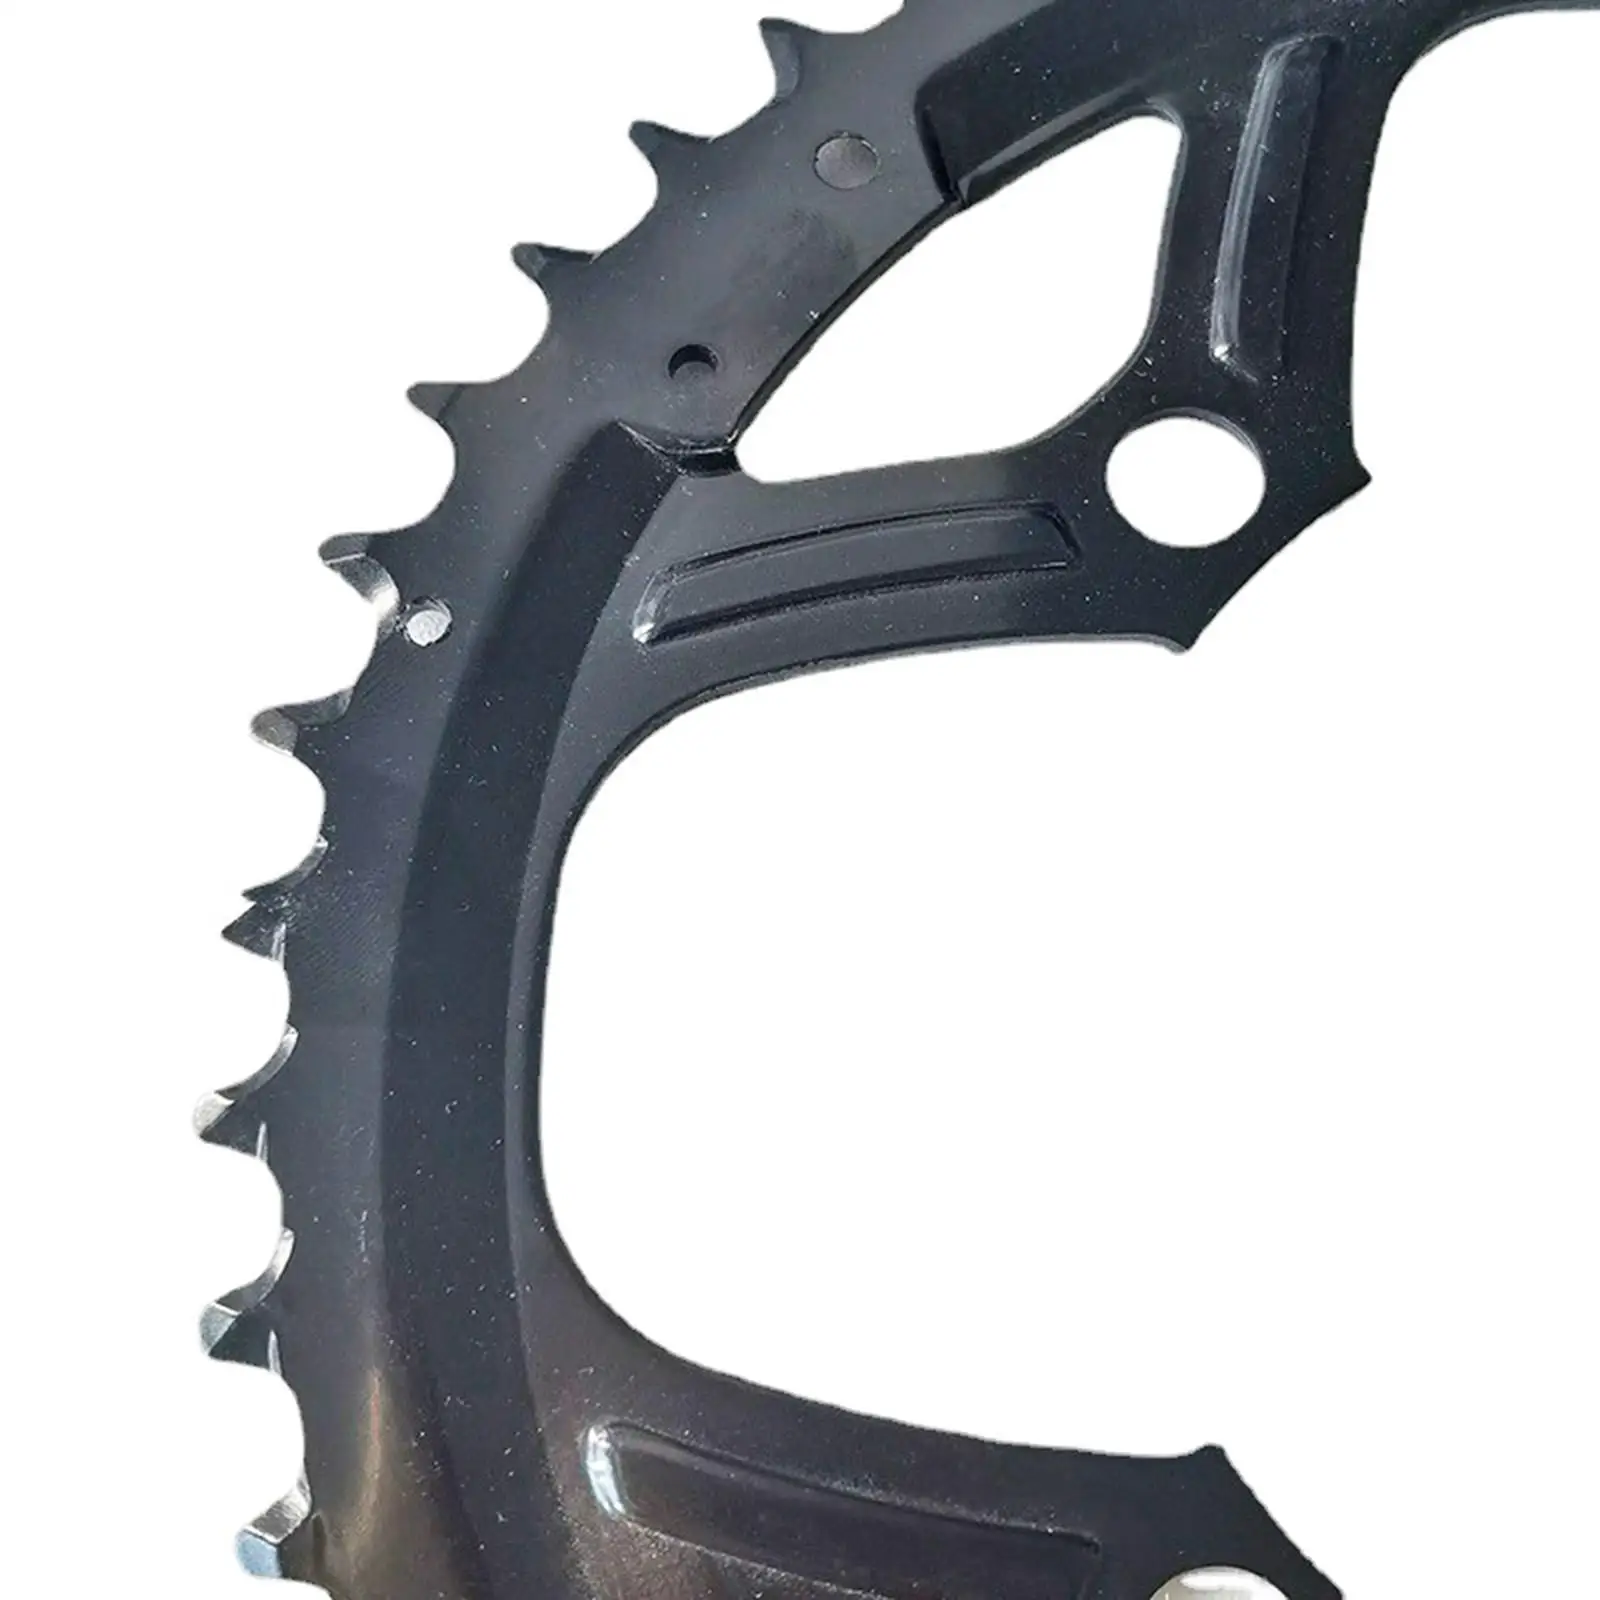 Round Oval Chainring 104mm BCD 48T Narrow Wide Single Chainring for 7/8/9   XC -Bike  Mountain Bike 